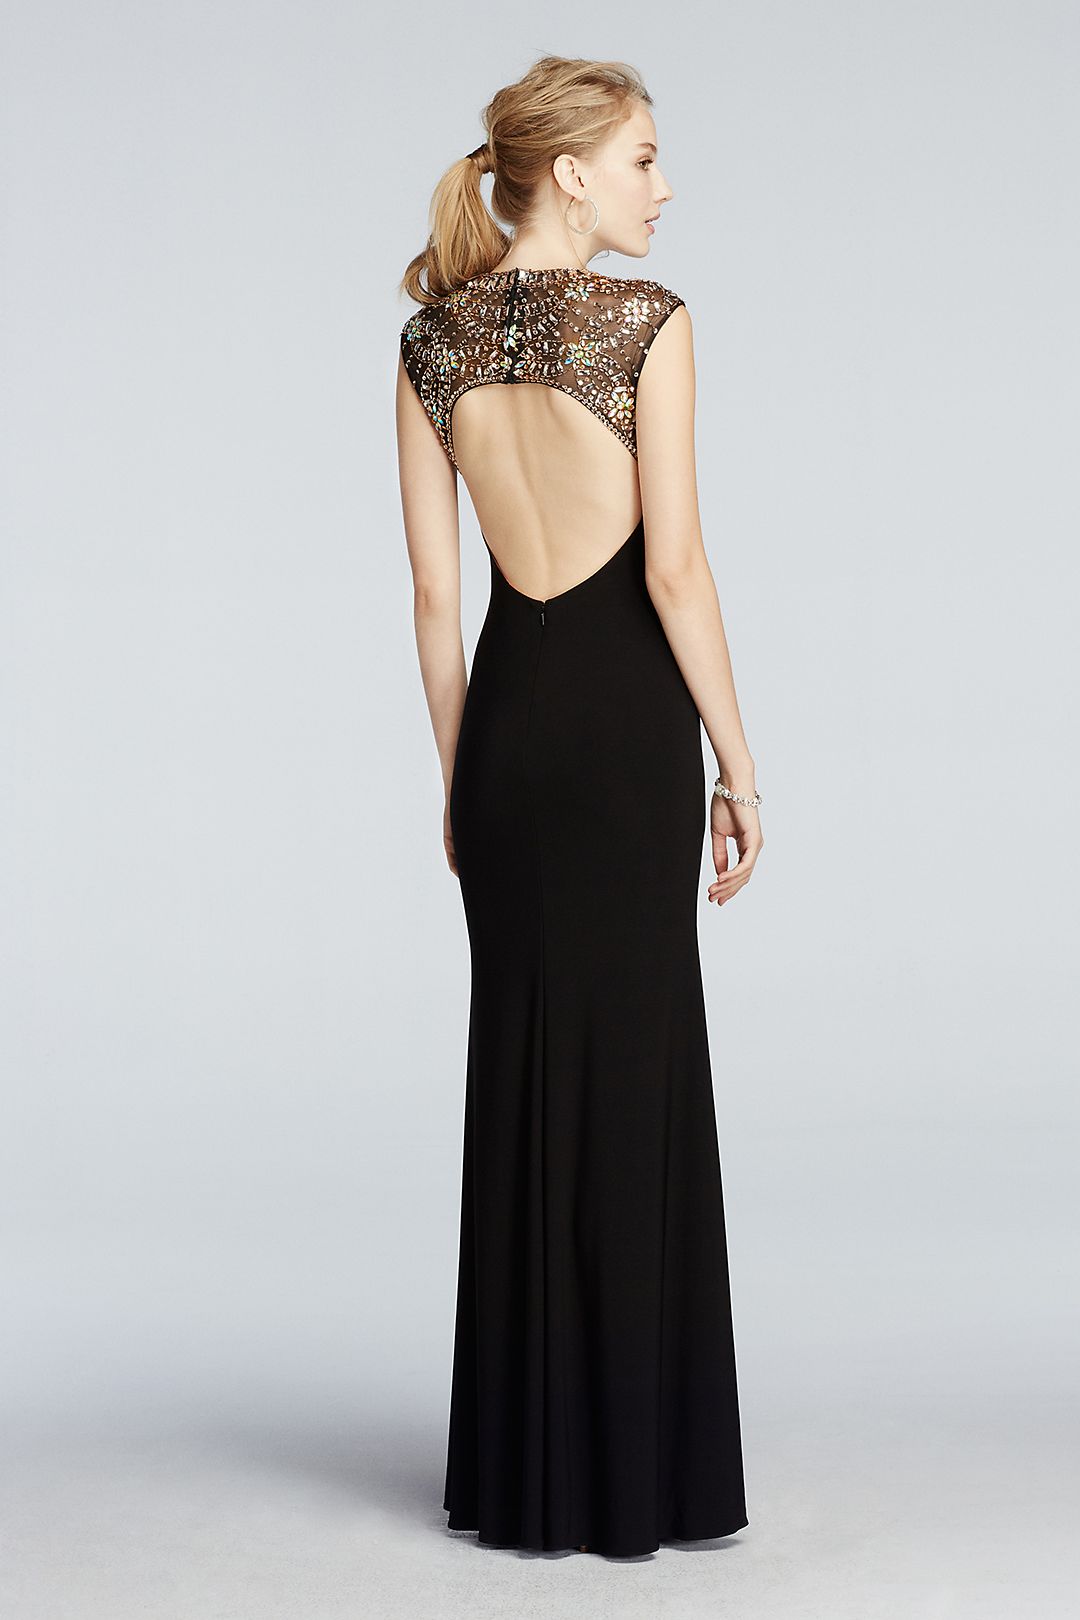 Beaded High Neck Tank Prom Dress with Side Slit Image 2